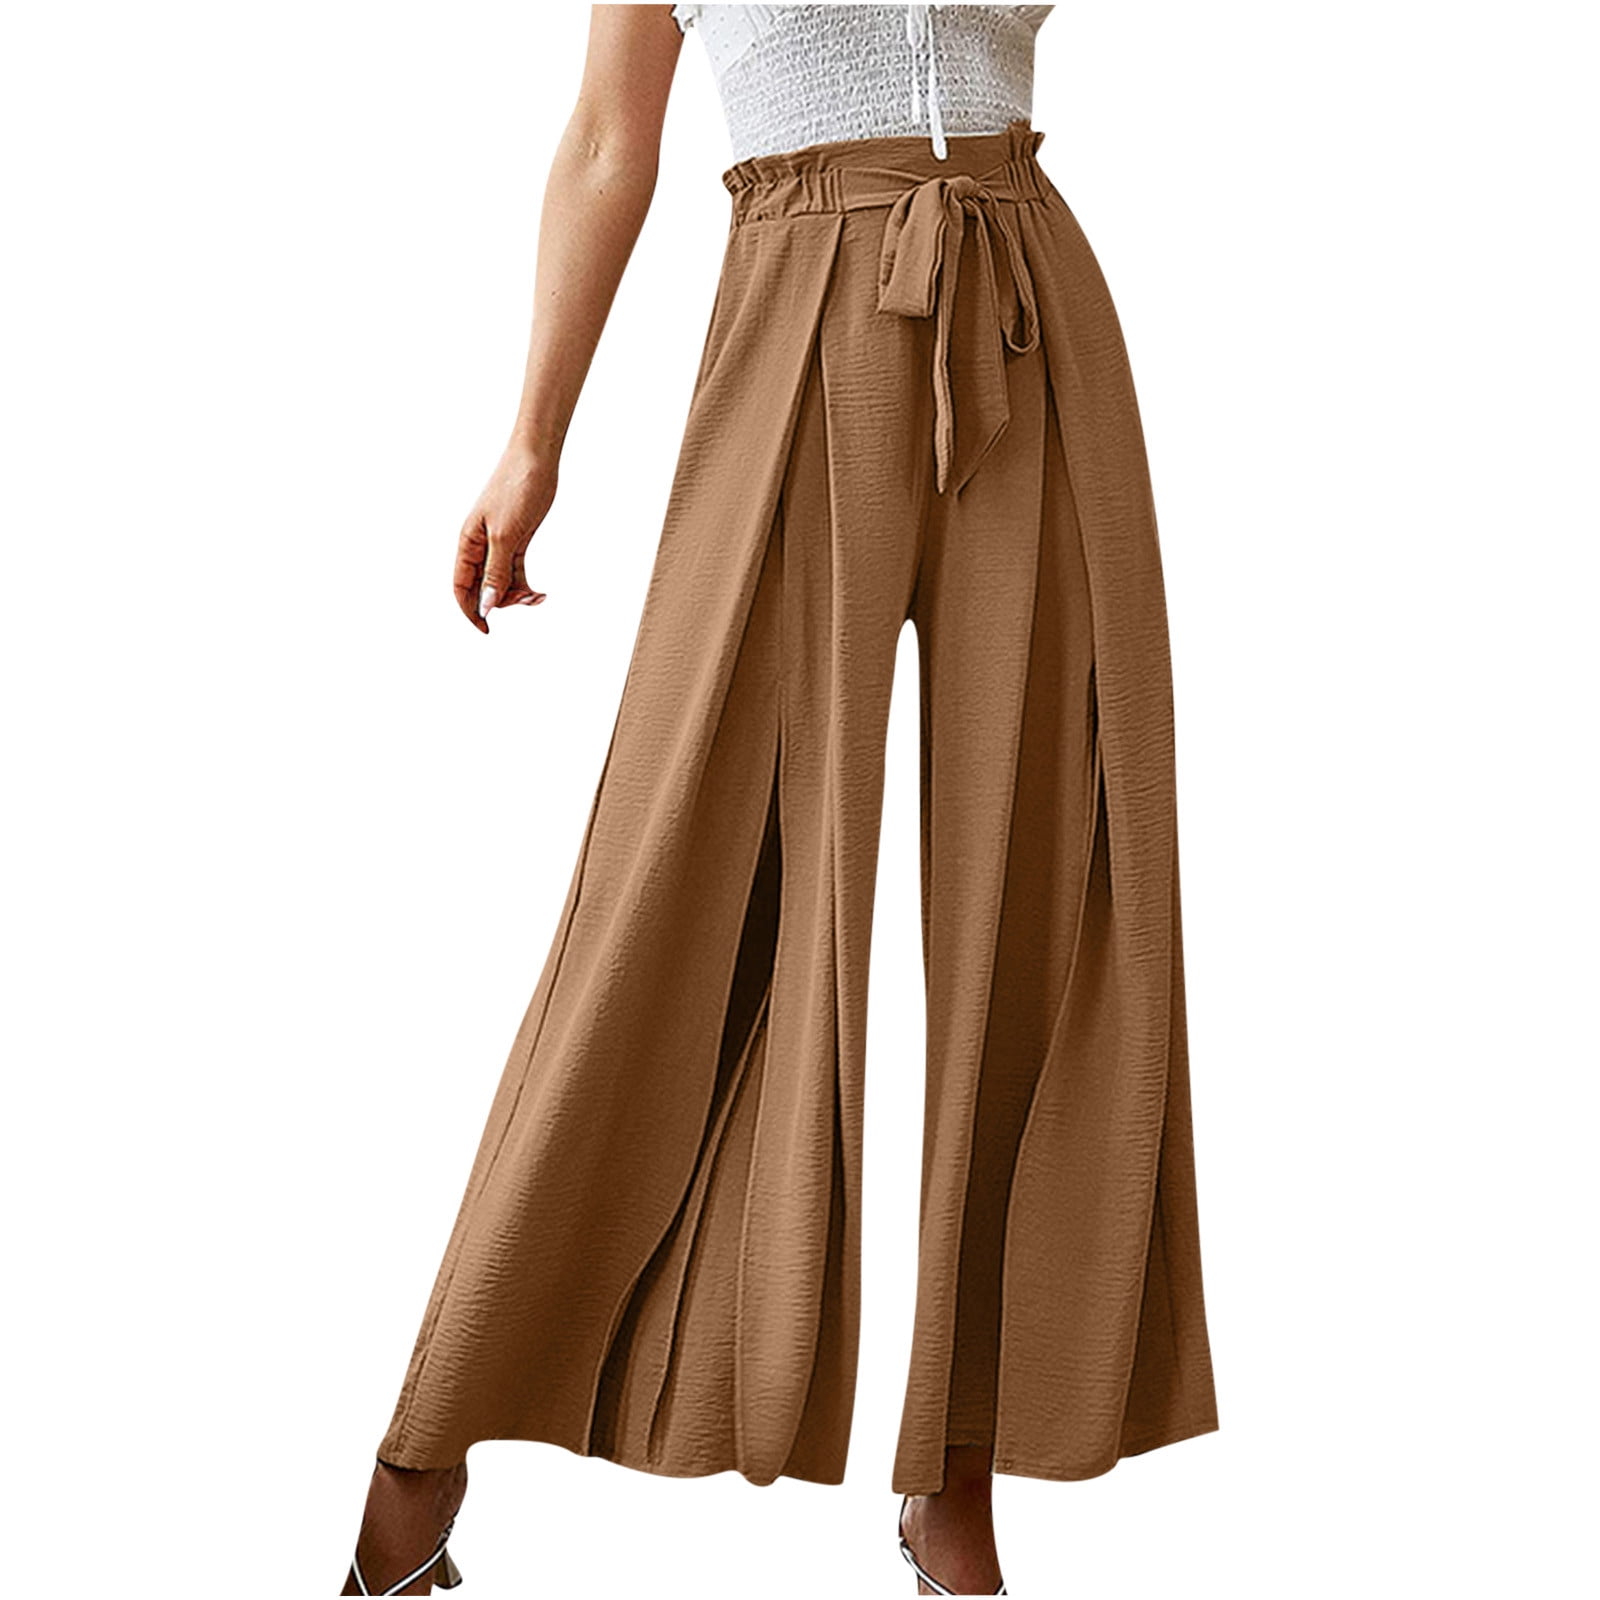 RYRJJ Dress Pants for Women High Waist Straight Wide Leg Palazzo Trousers  Loose Comfy Casual Business Work Pants with Pockets(Brown,XL)